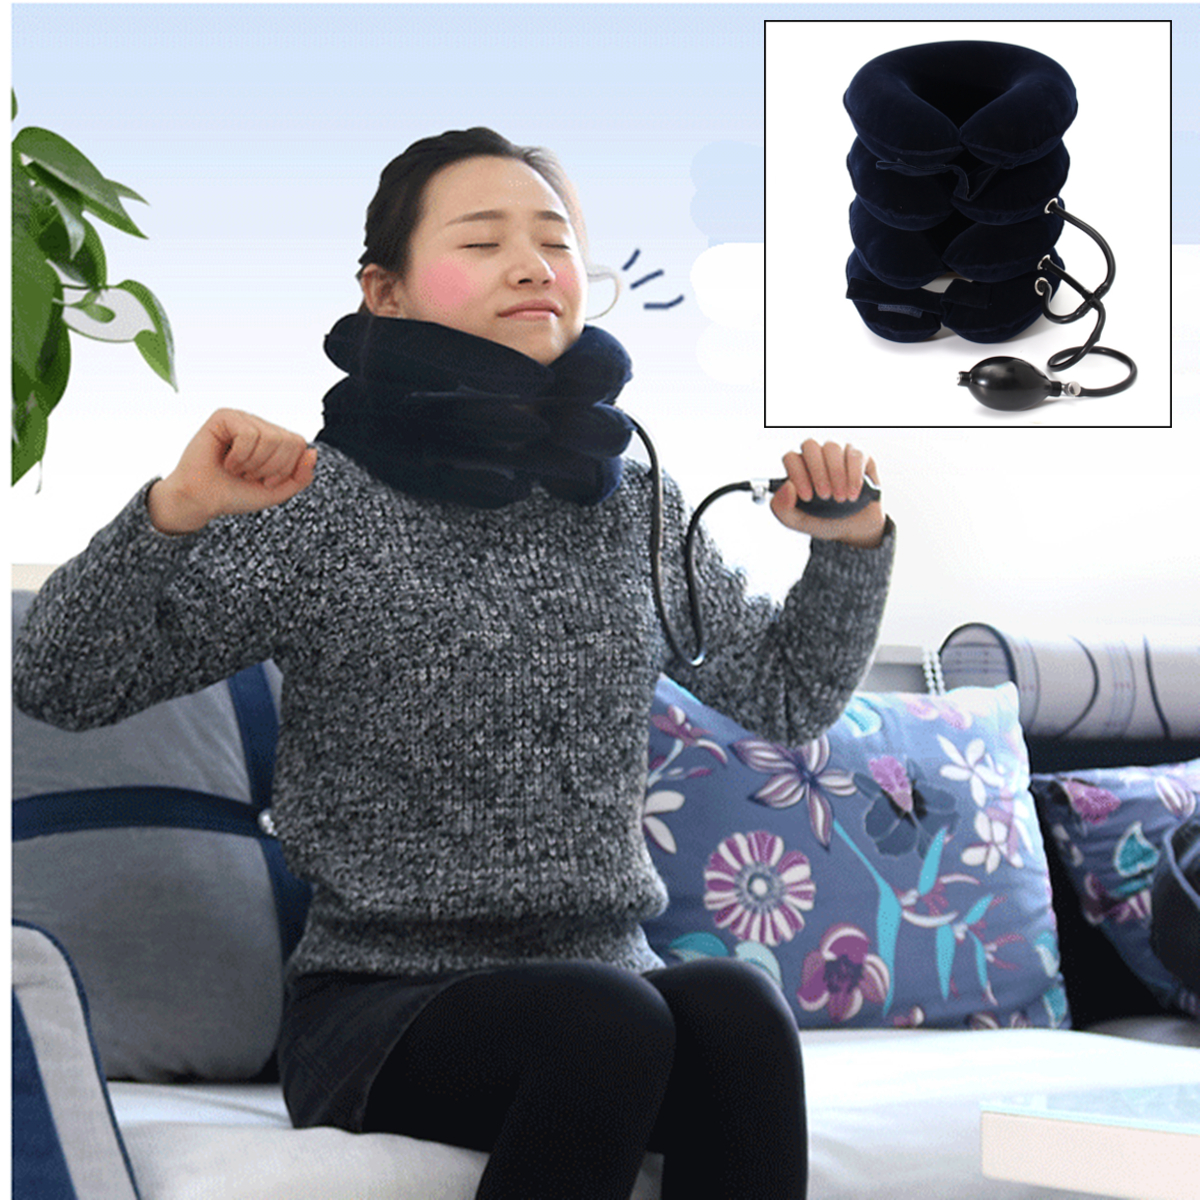 IPReereg-Inflatable-Air-Pillow-Cervical-Traction-Neck-Brace-Support-Shoulder-Pain-Relief-1193979-1